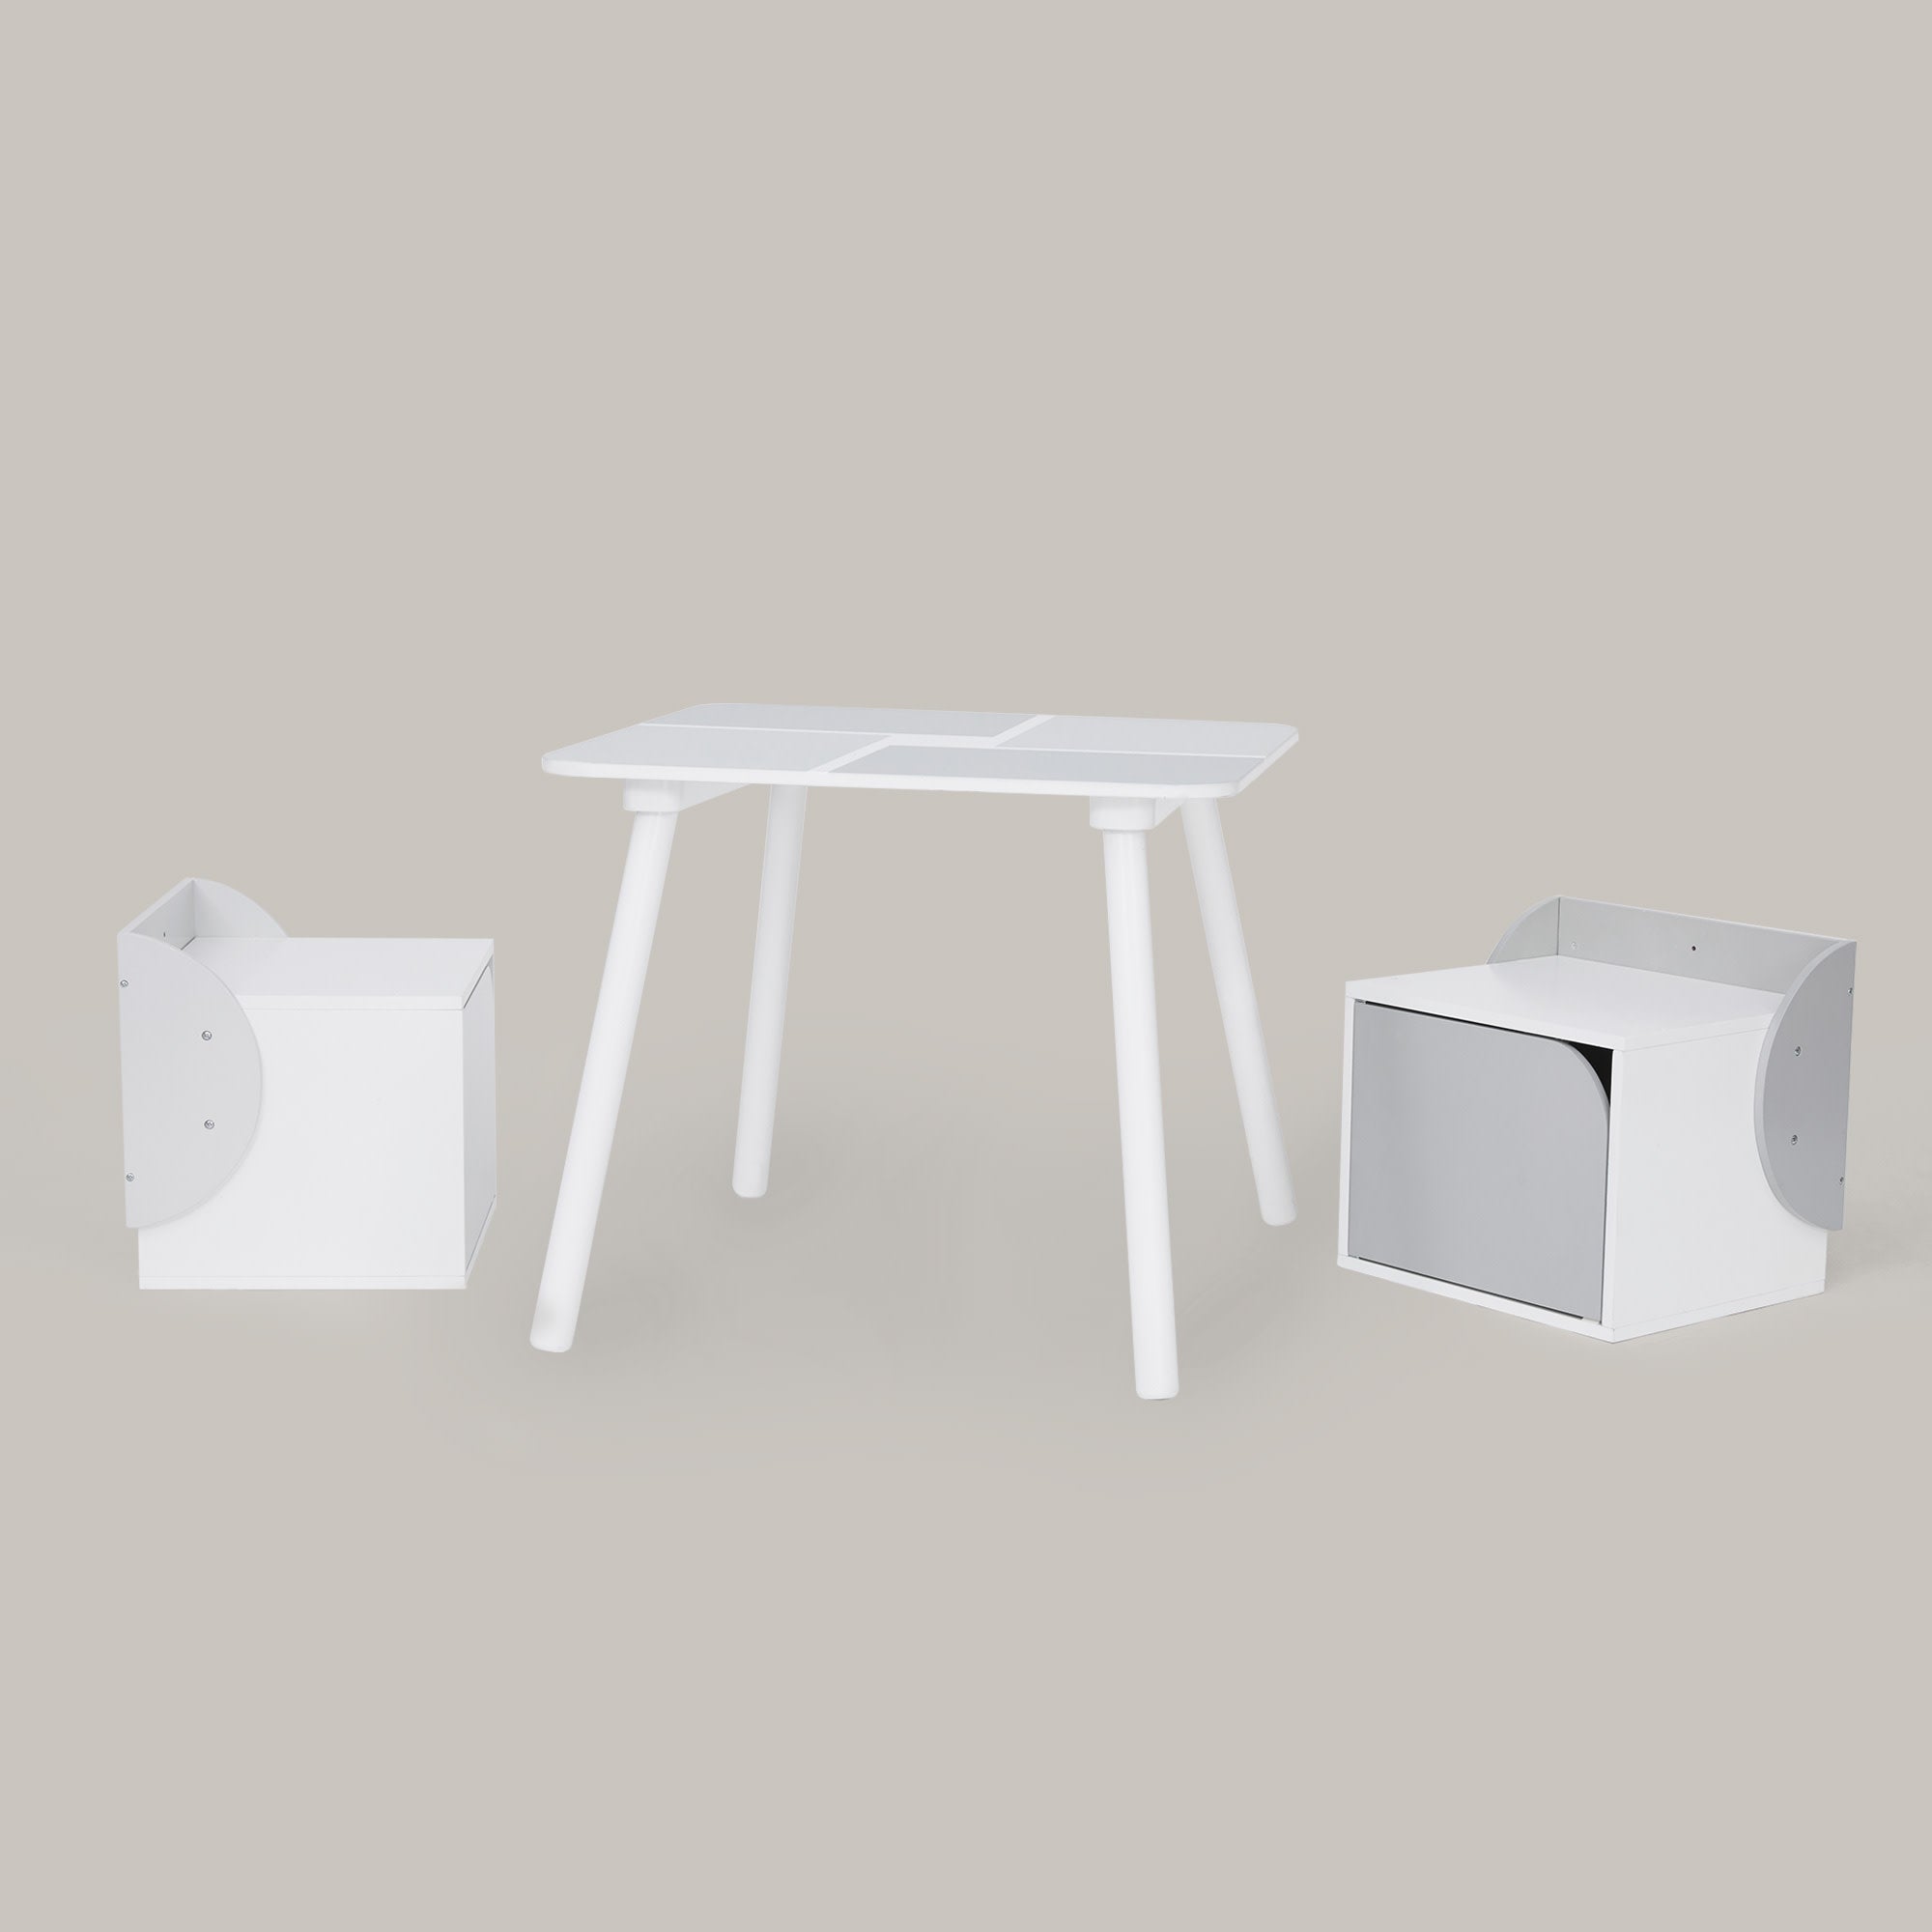 Fantasy Fields Kids Wooden Biscay Bricks Square Table and Two Chair Cubes with Underneath Storage, Gray/White